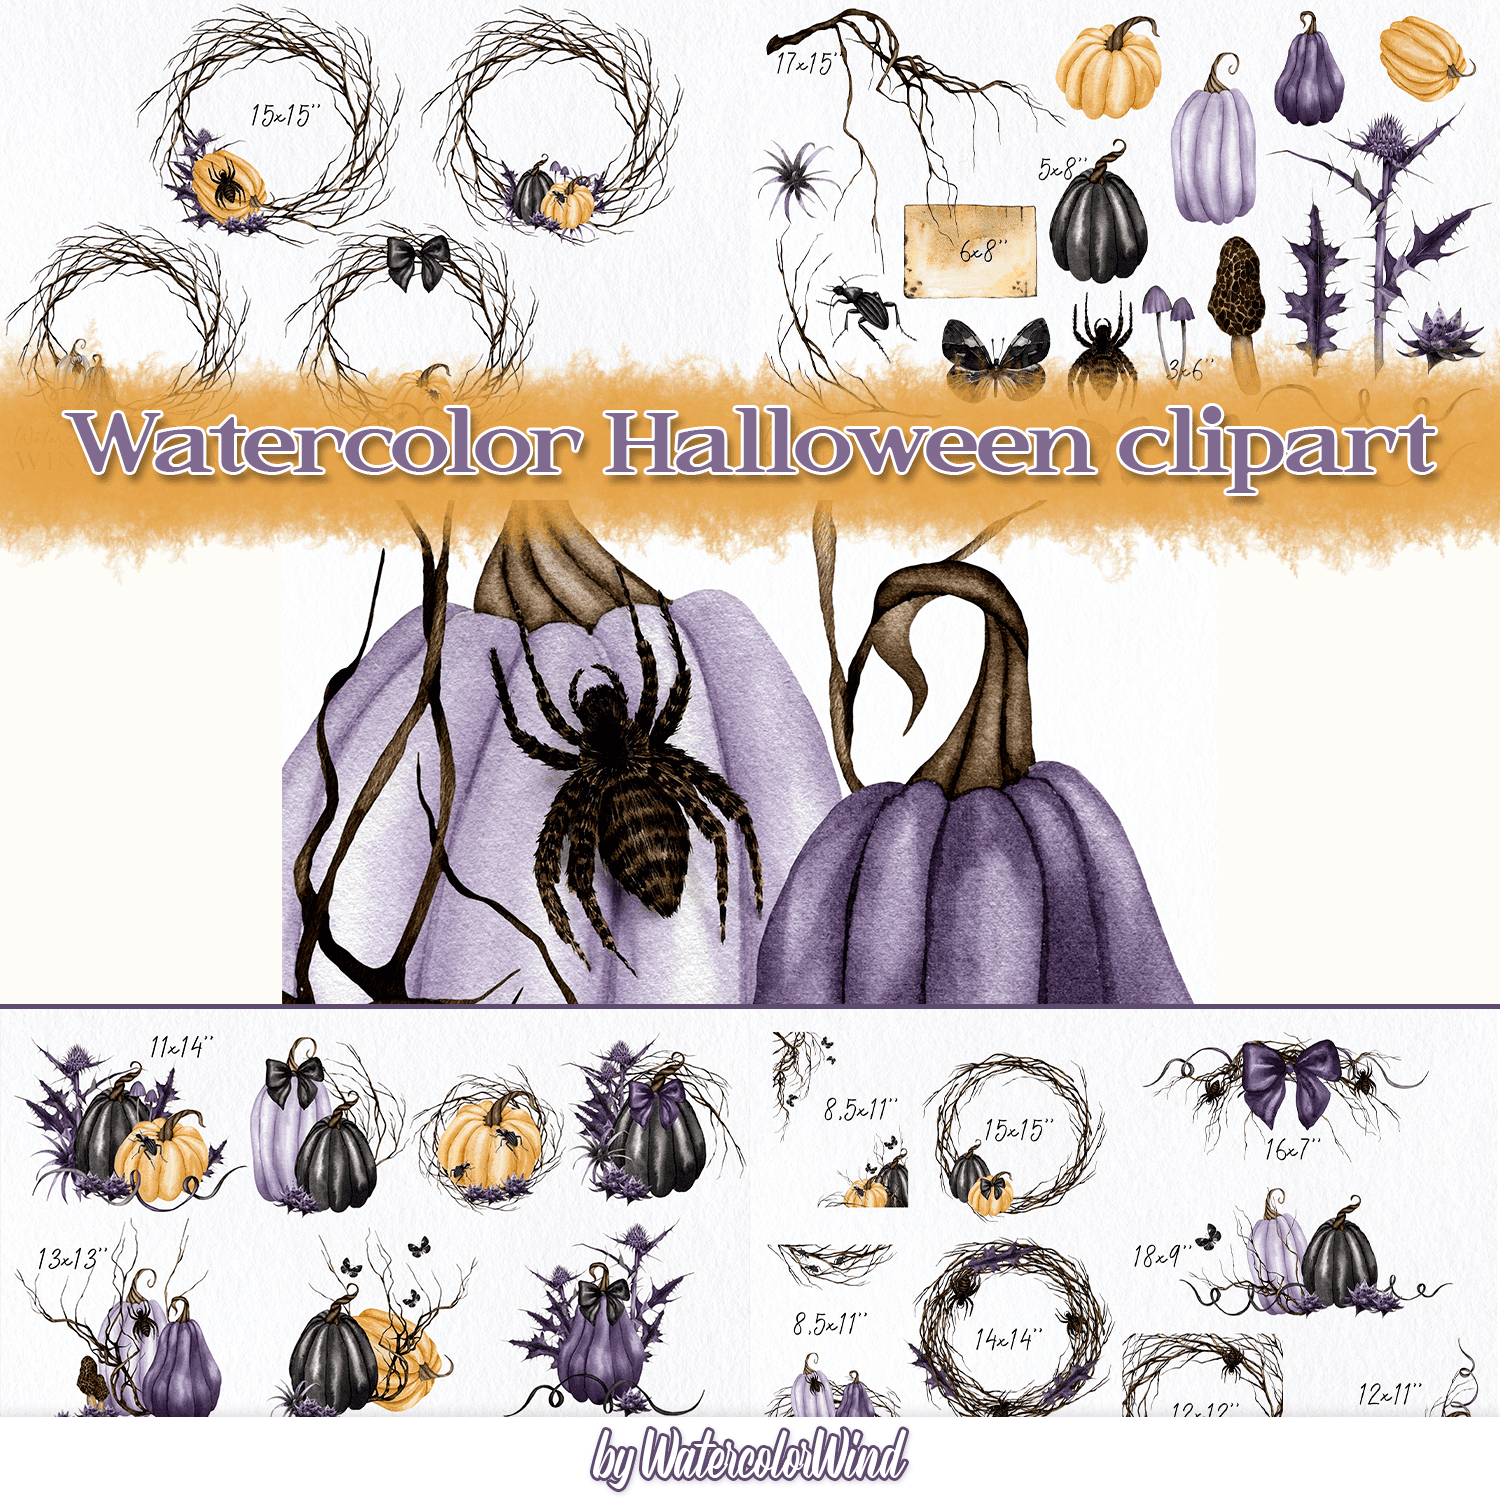 Watercolor Halloween clipart cover.